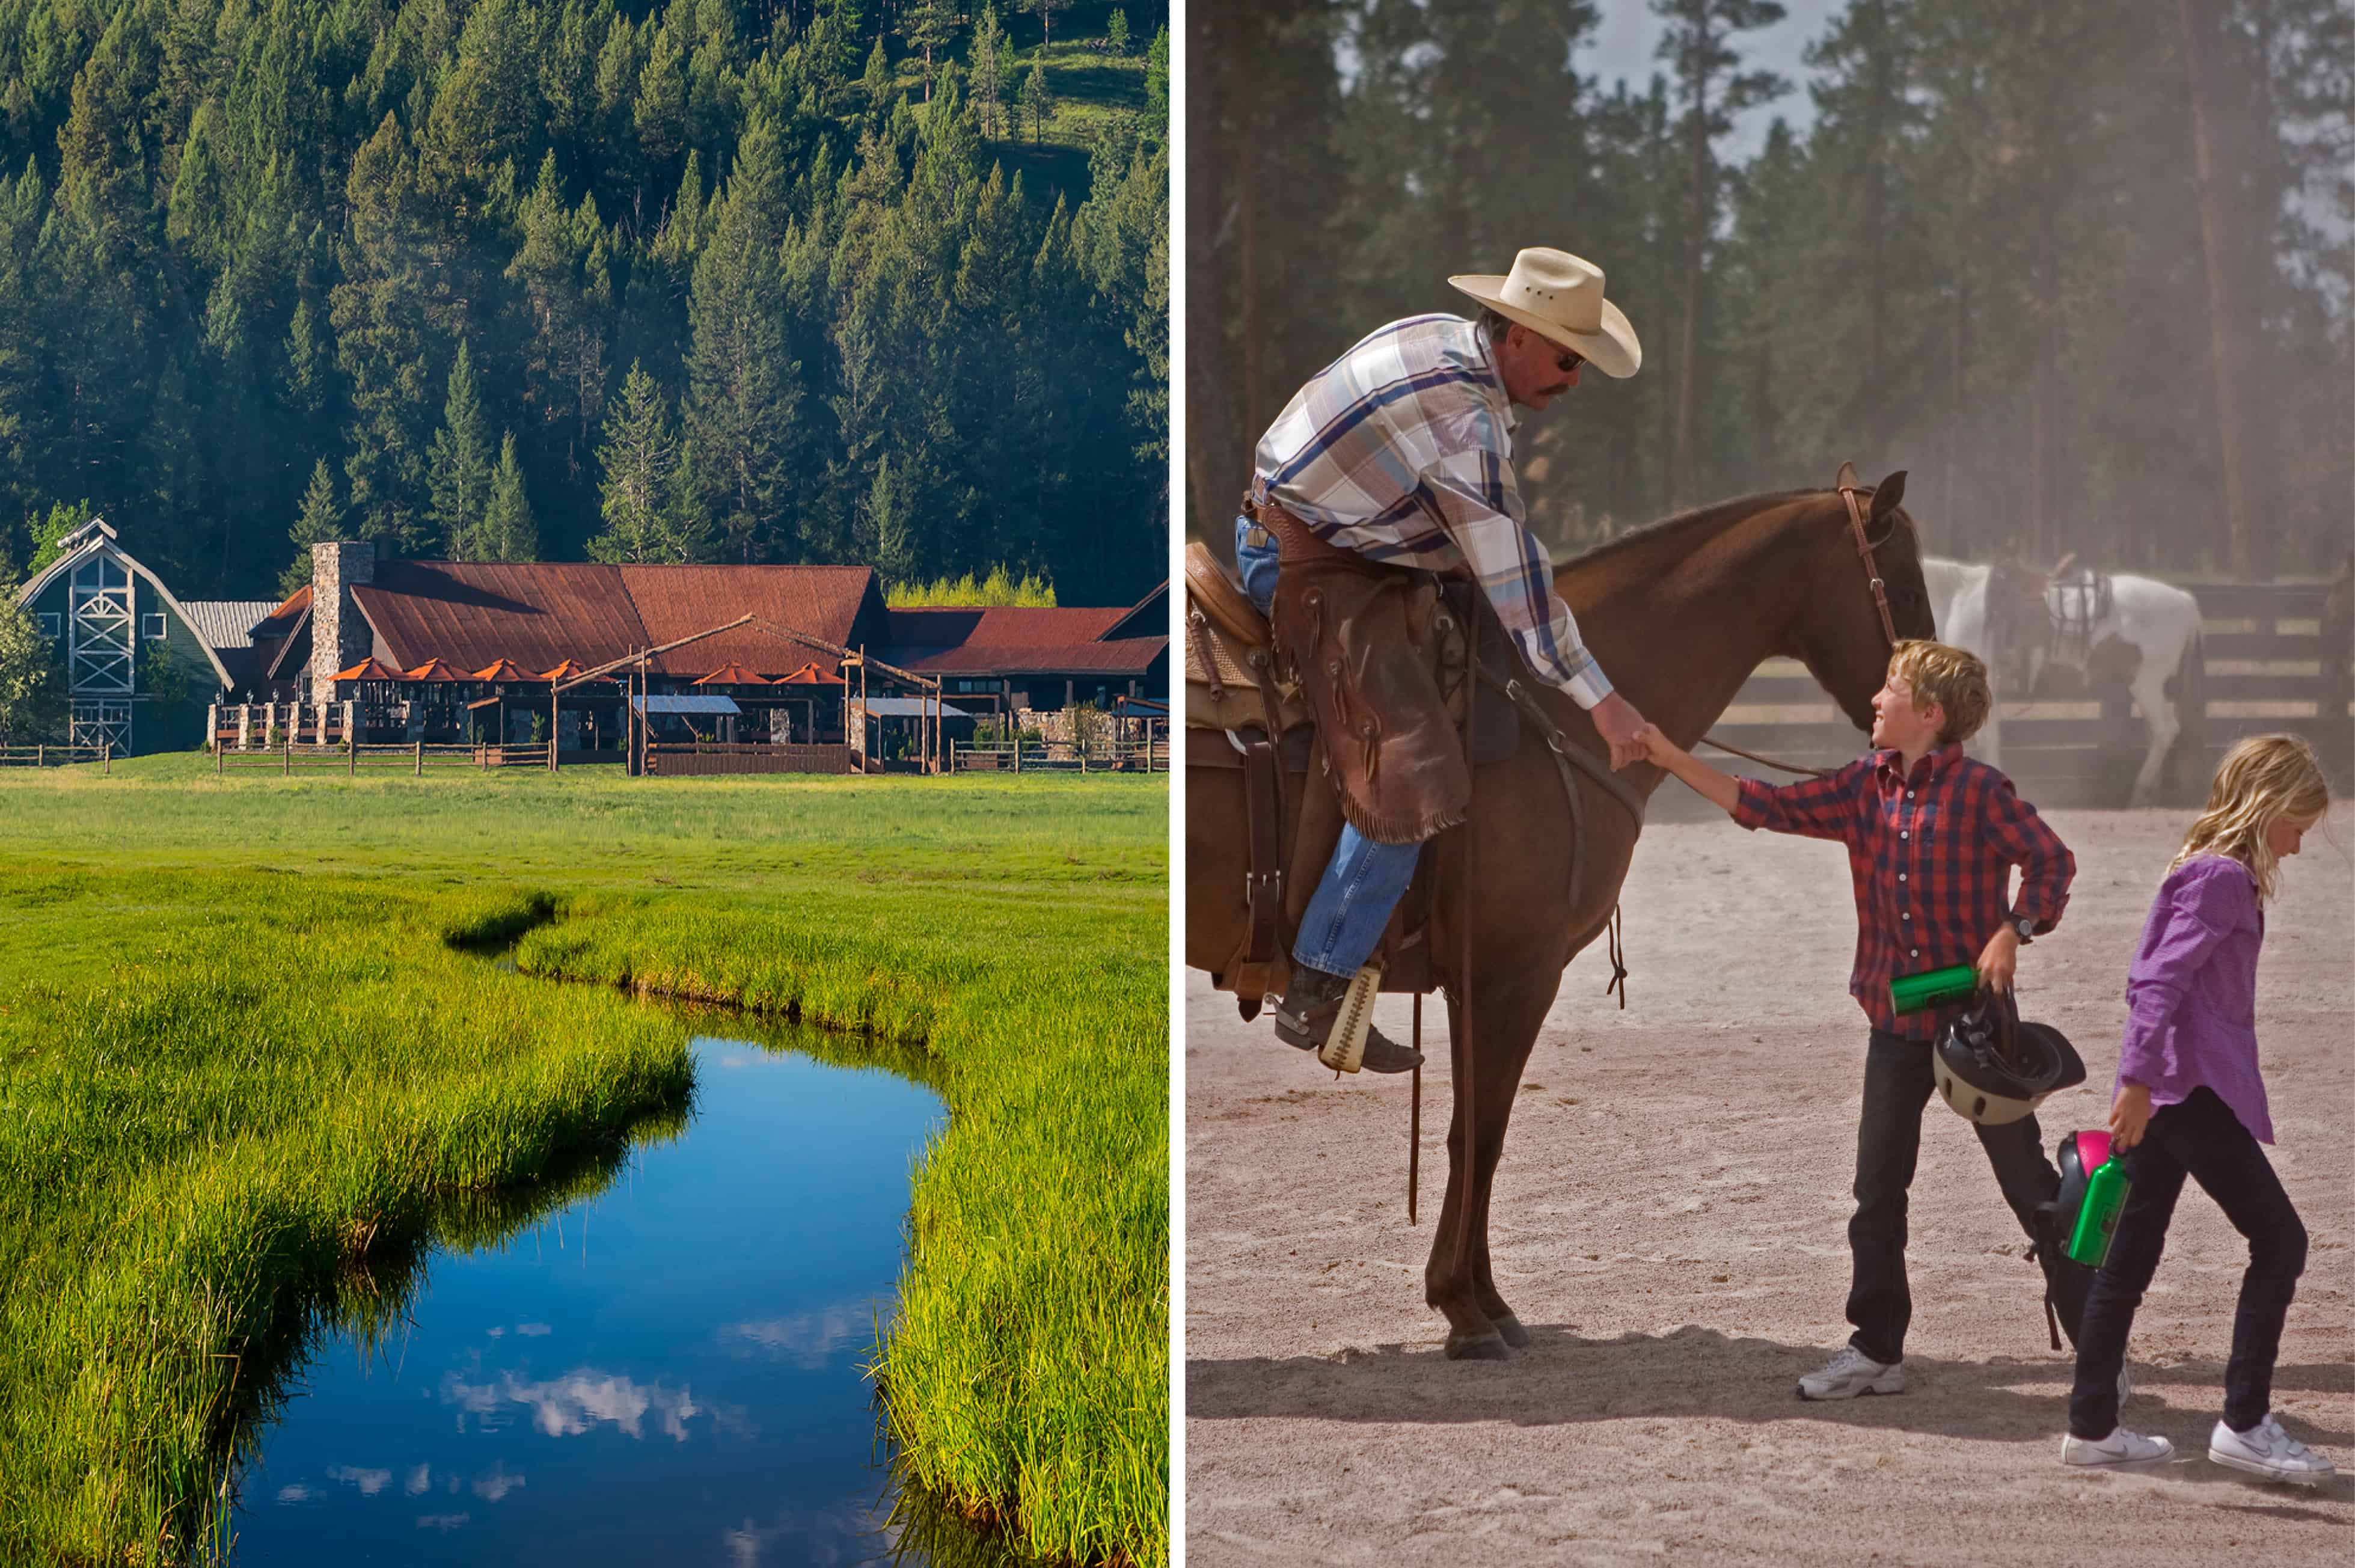 Paws Up resort exterior and horseback rider with children in Montana